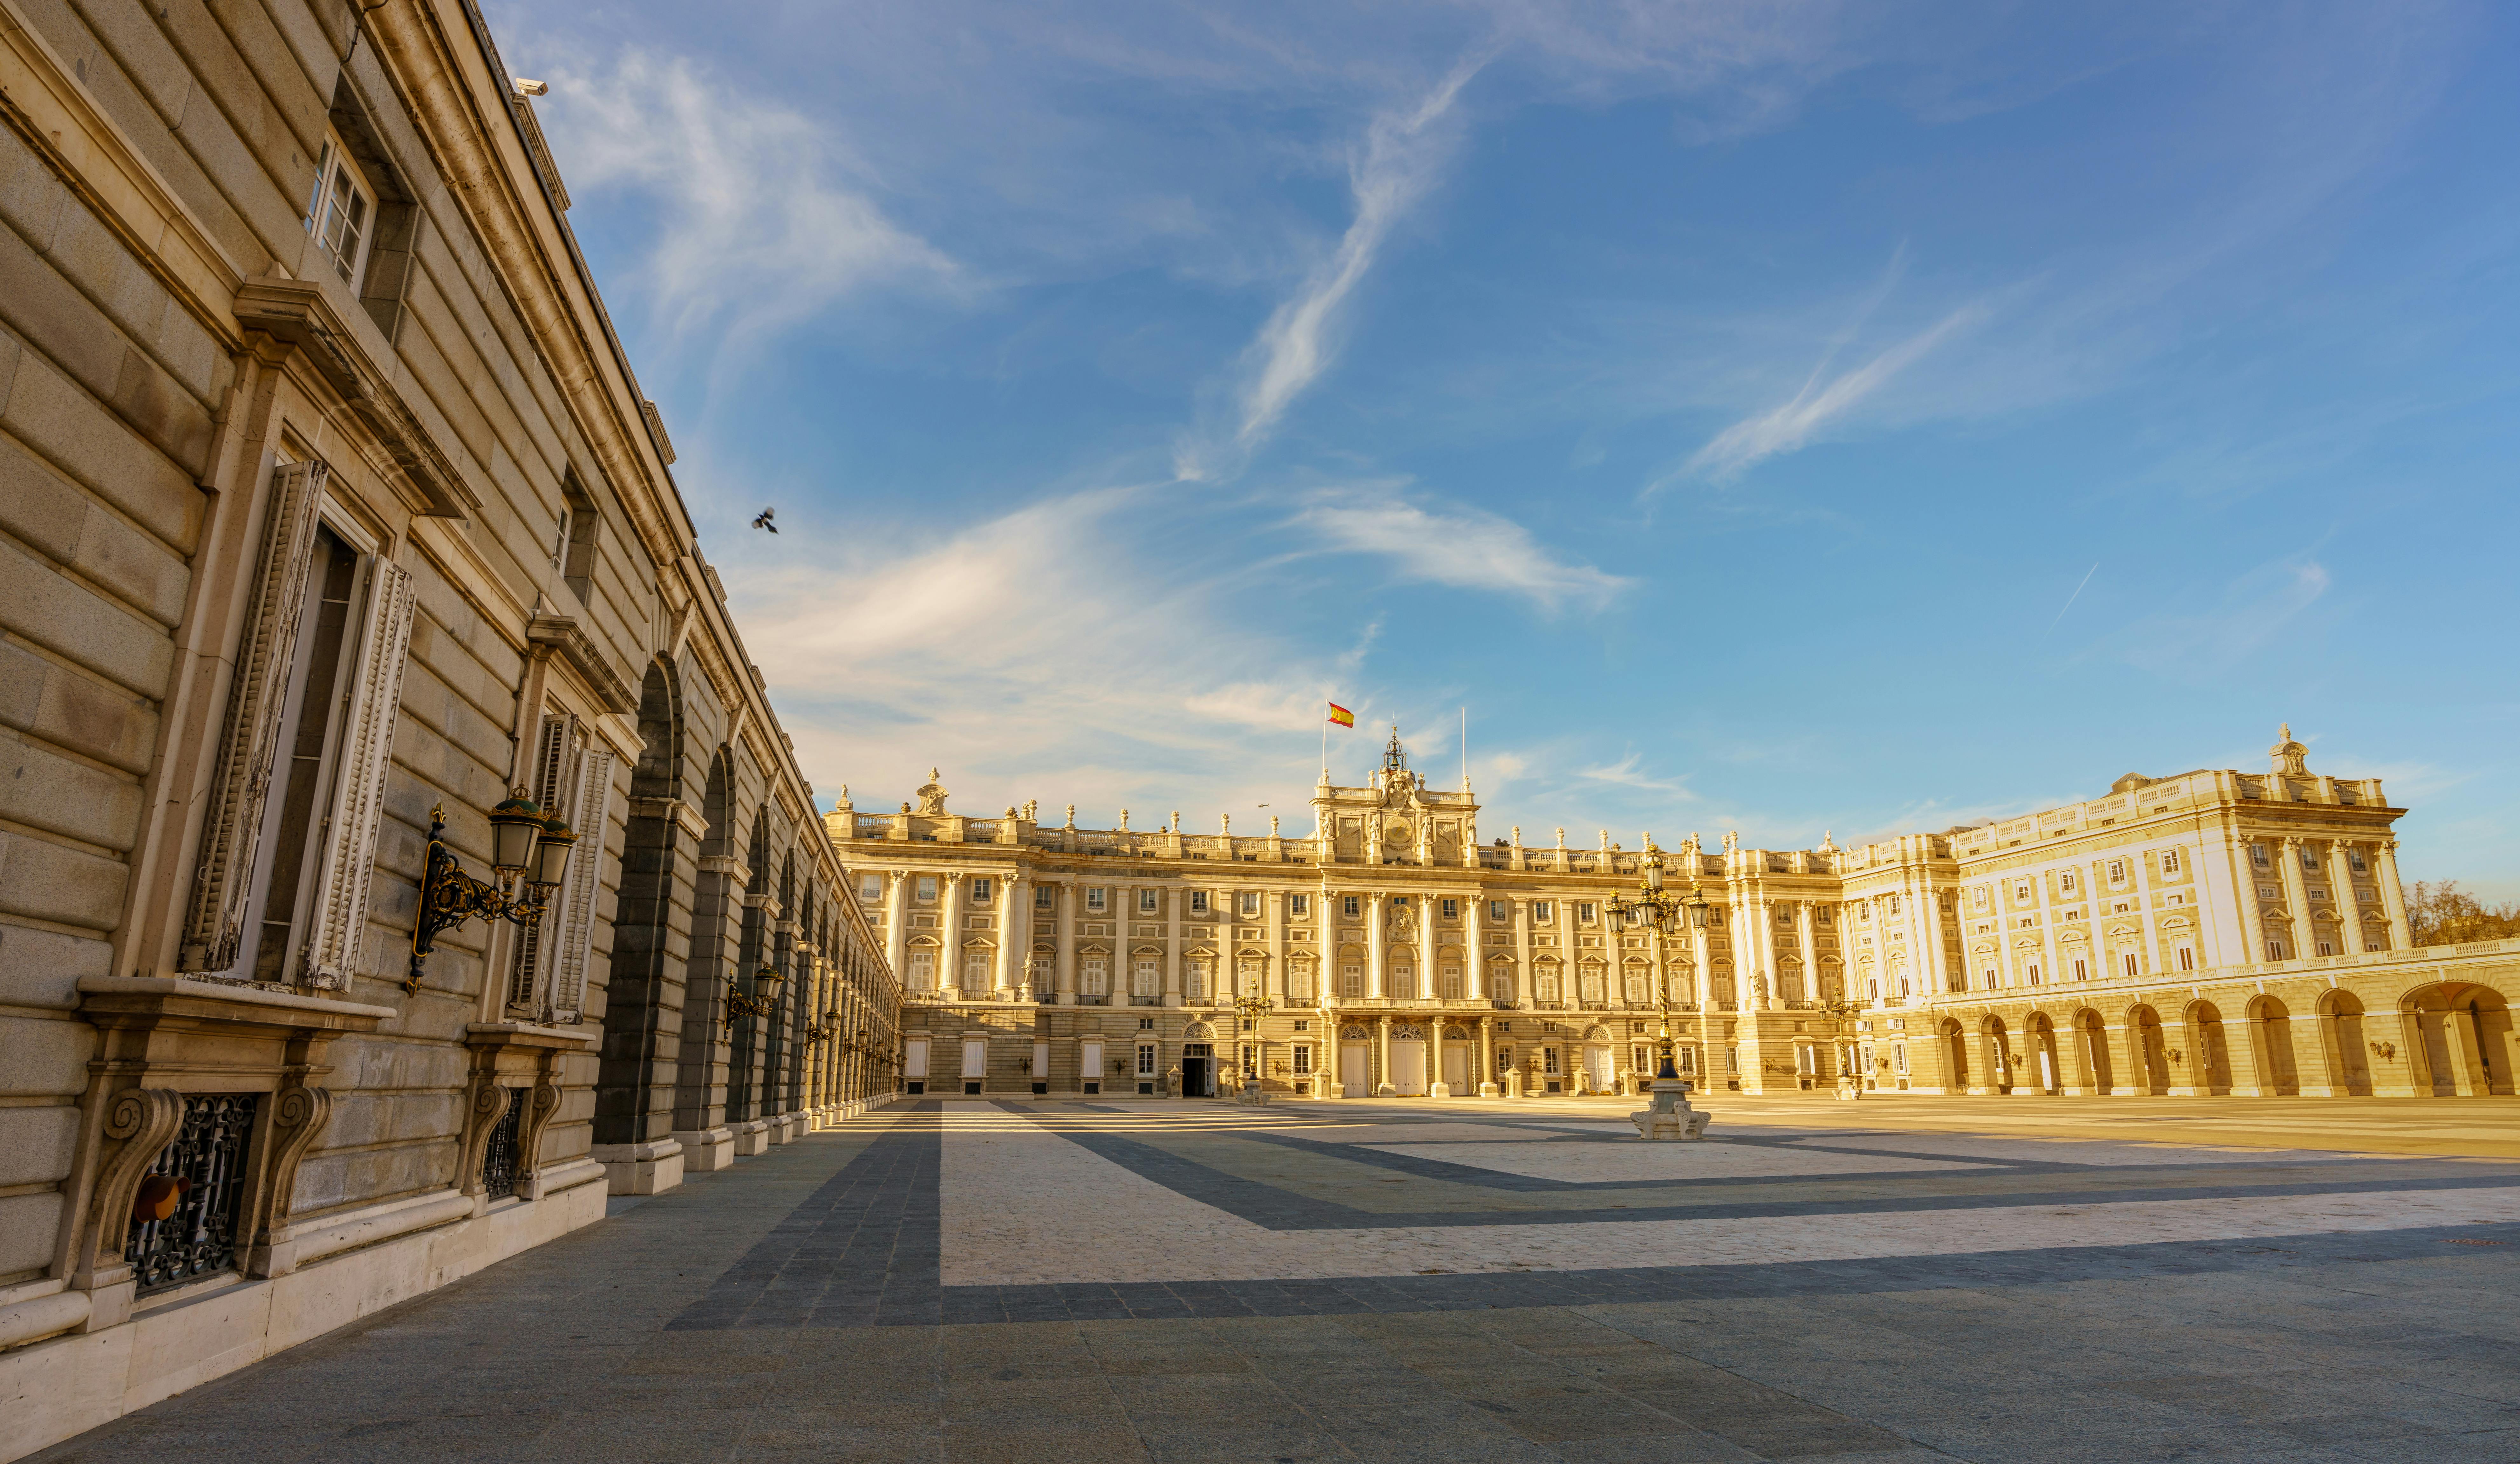 Madrid Royal Palace and Retiro Park guided tour with fast-track access